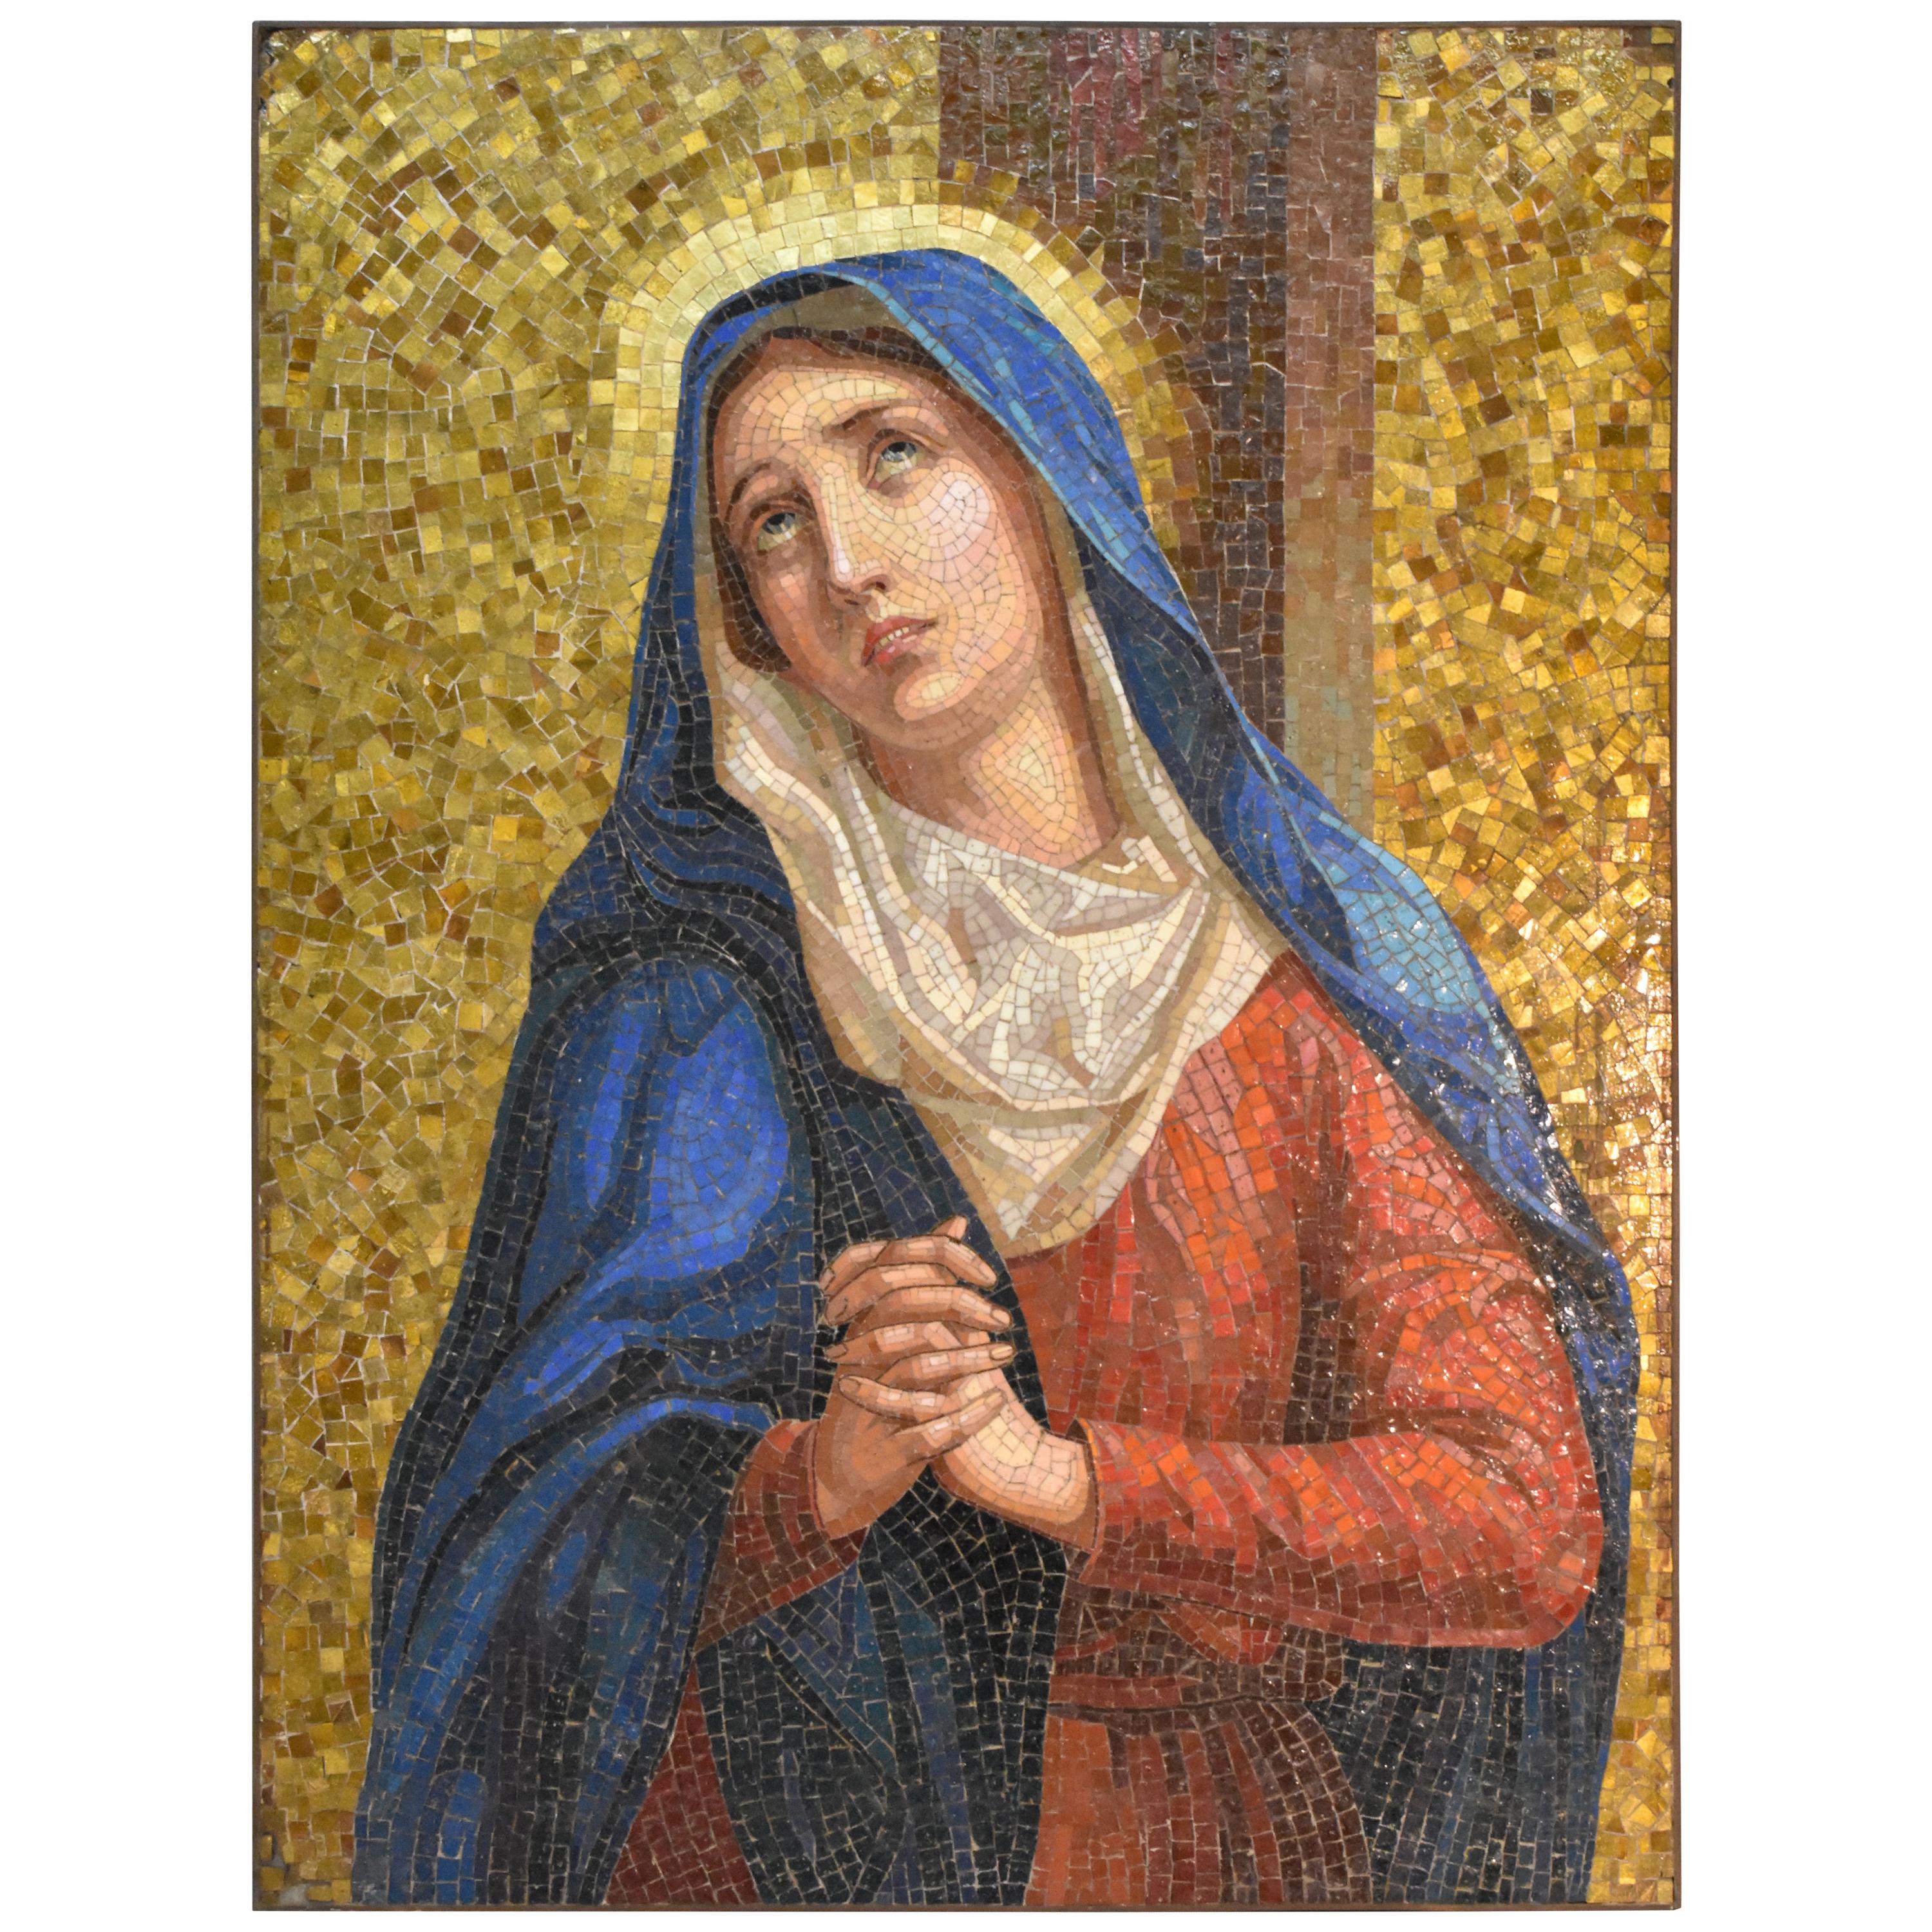 Glass Tile Mosaic Plaque "Our Lady of Sorrows"